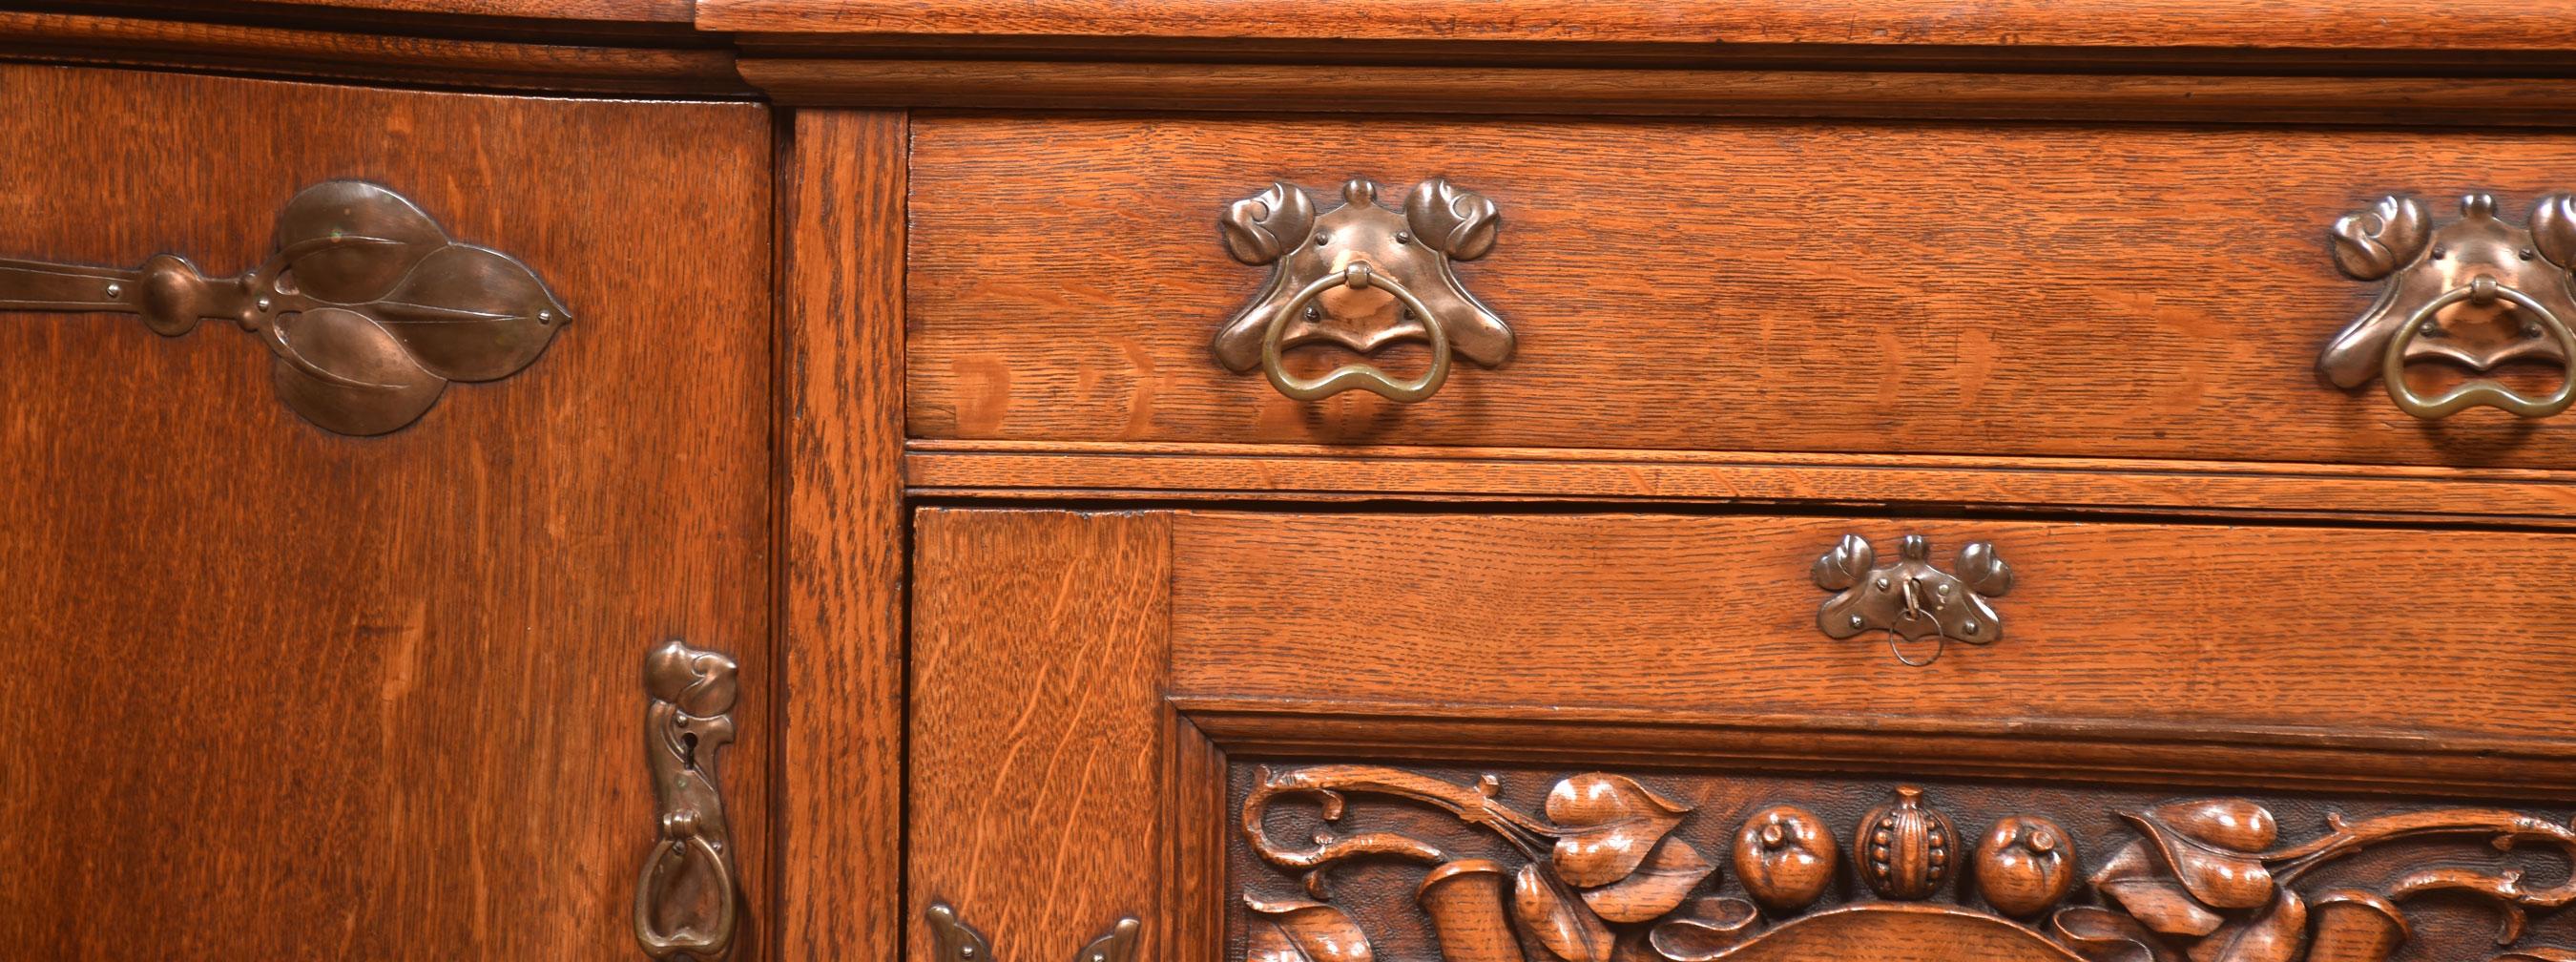 Late 19th-century oak sideboard in the Arts & Crafts style, the large rectangular top with bowed front to the large freeze drawer with stylised handles. Above three cupboard doors, one door opening to a lead-lined cellarette drawer, the body of the